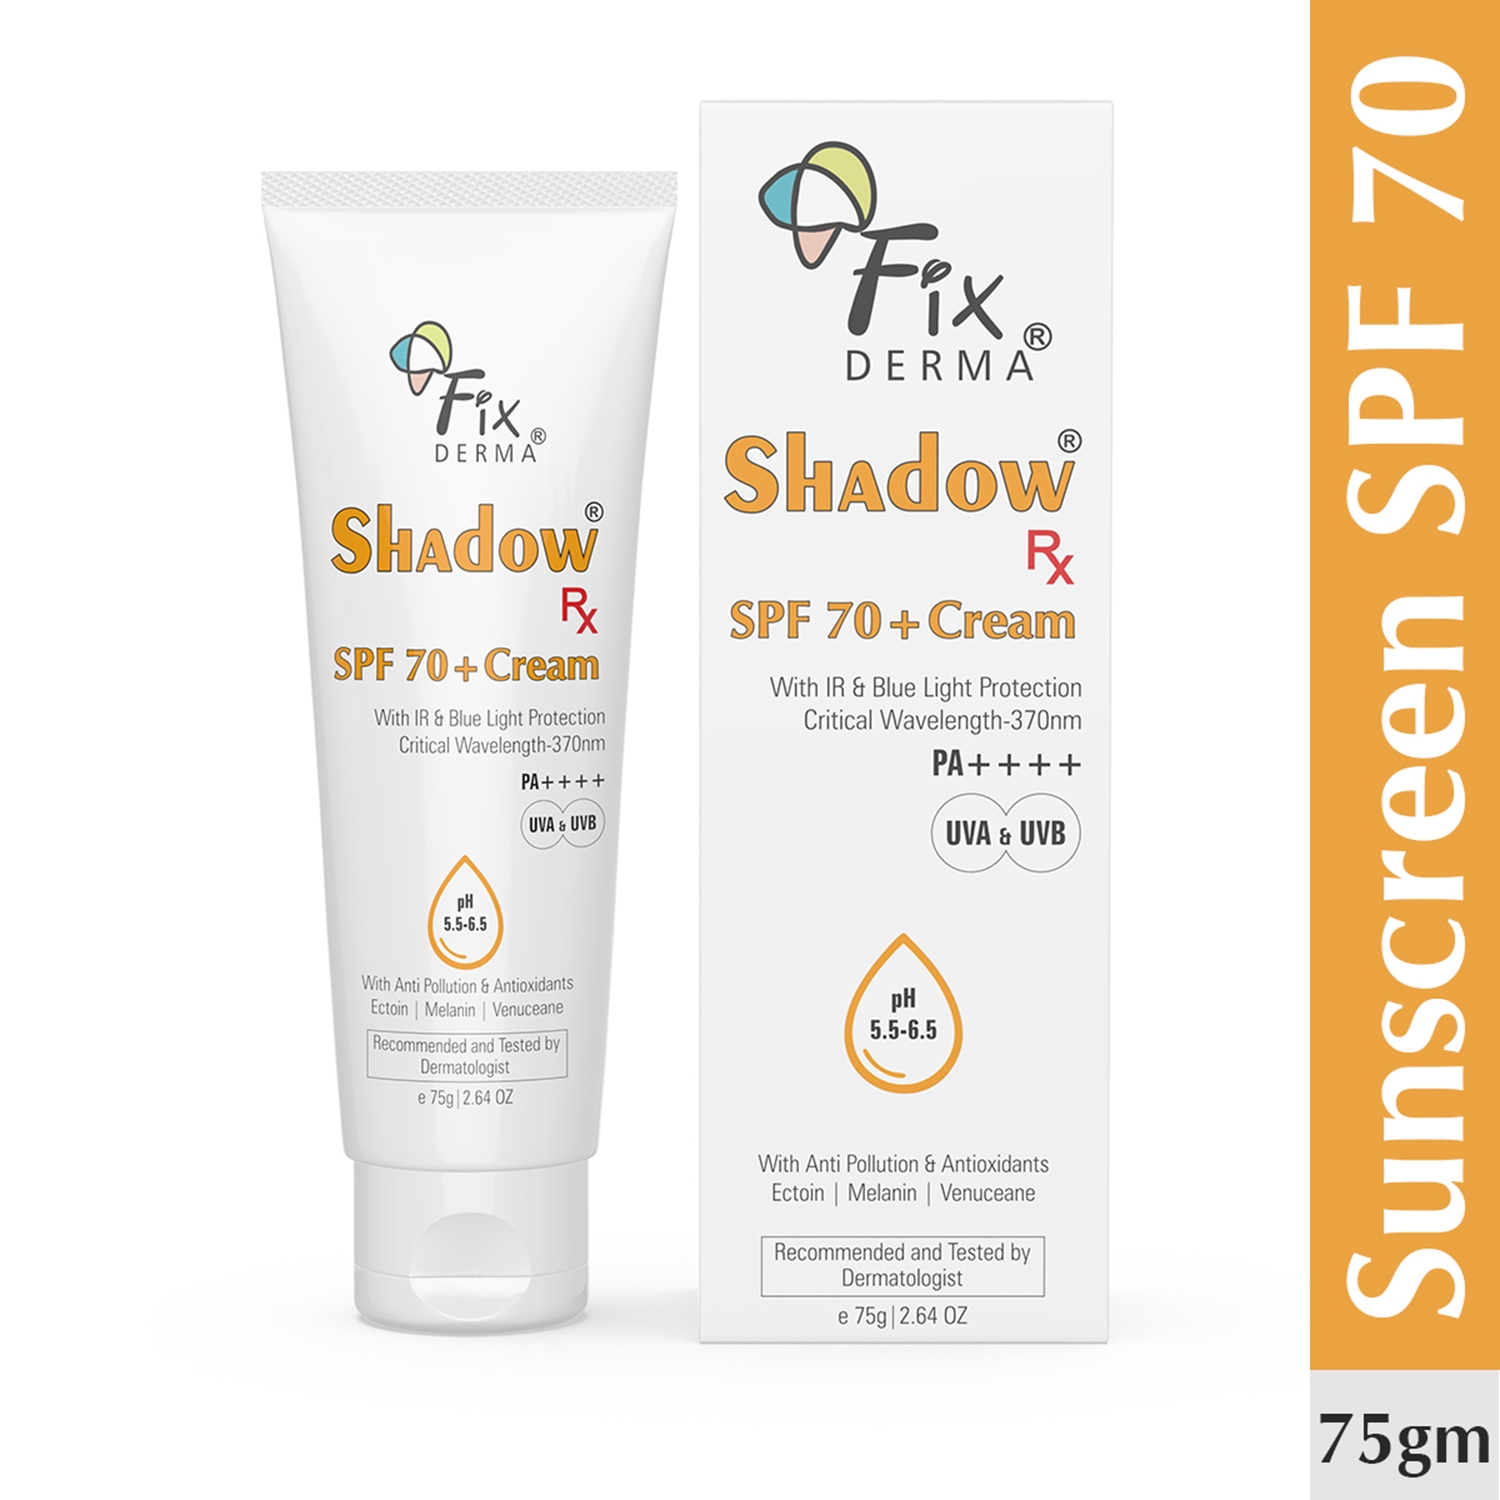 Fixderma | Fixderma Shadow RX Sunscreen SPF 70+ UVA & UVB with IR Protection & Blue Light Protection (75g)